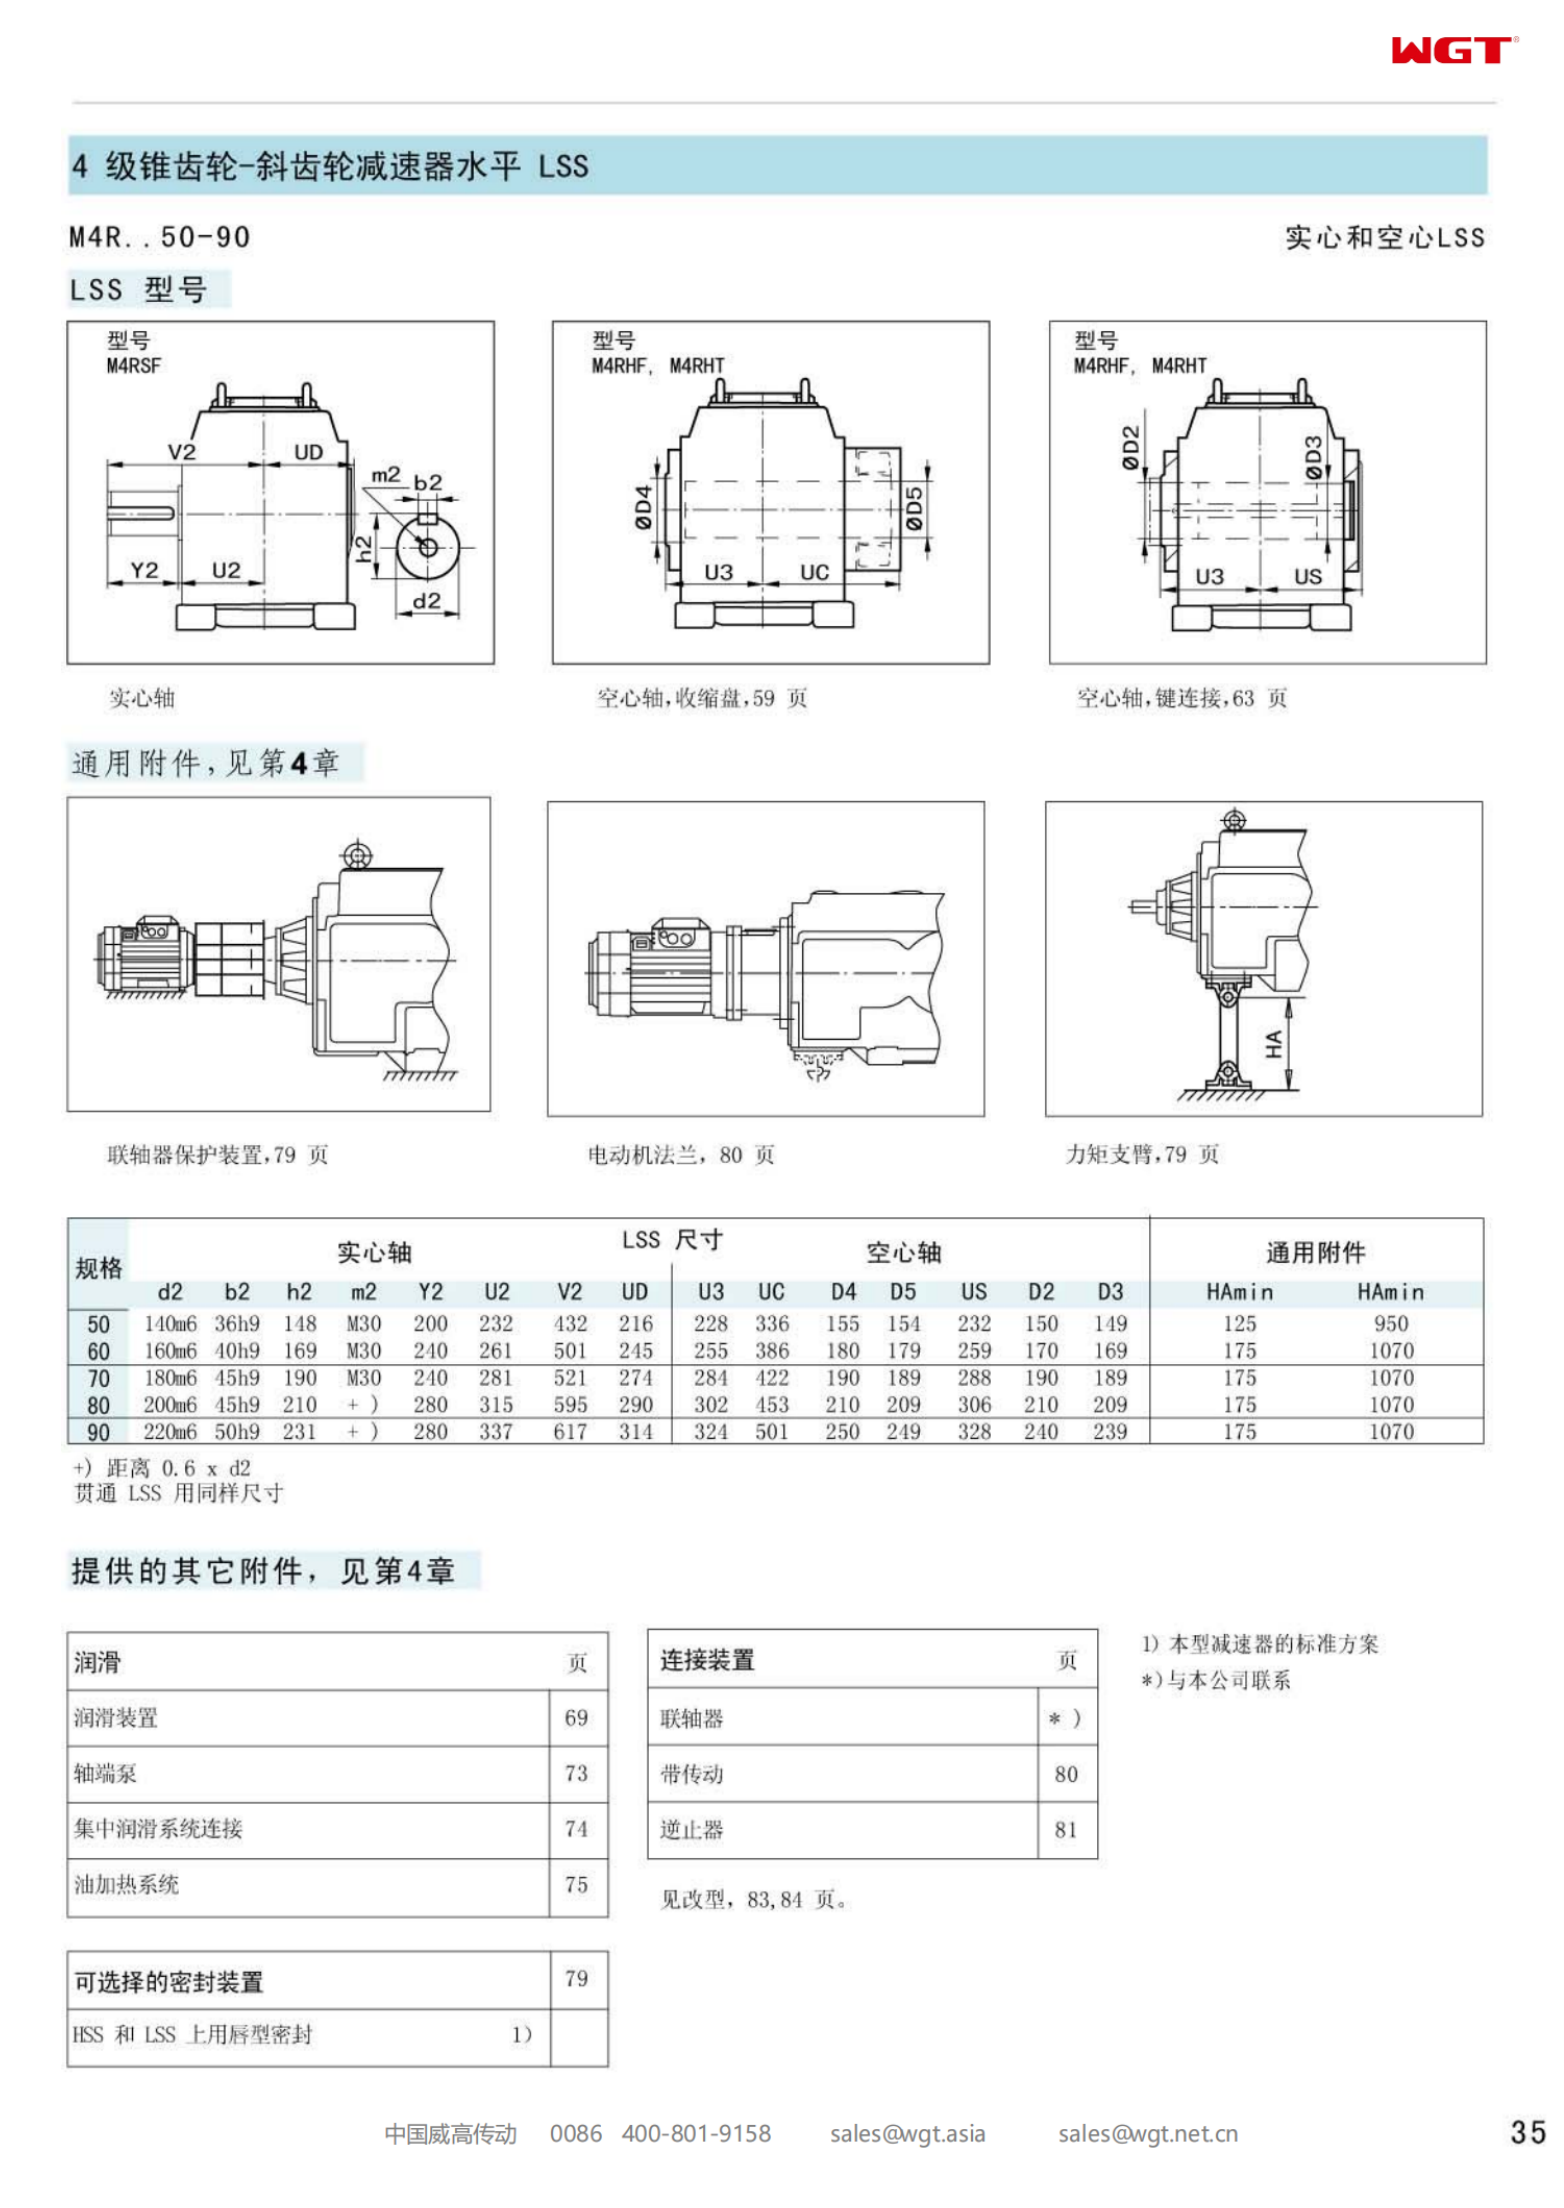 M4RHF70 Replace_SEW_M_Series Gearbox